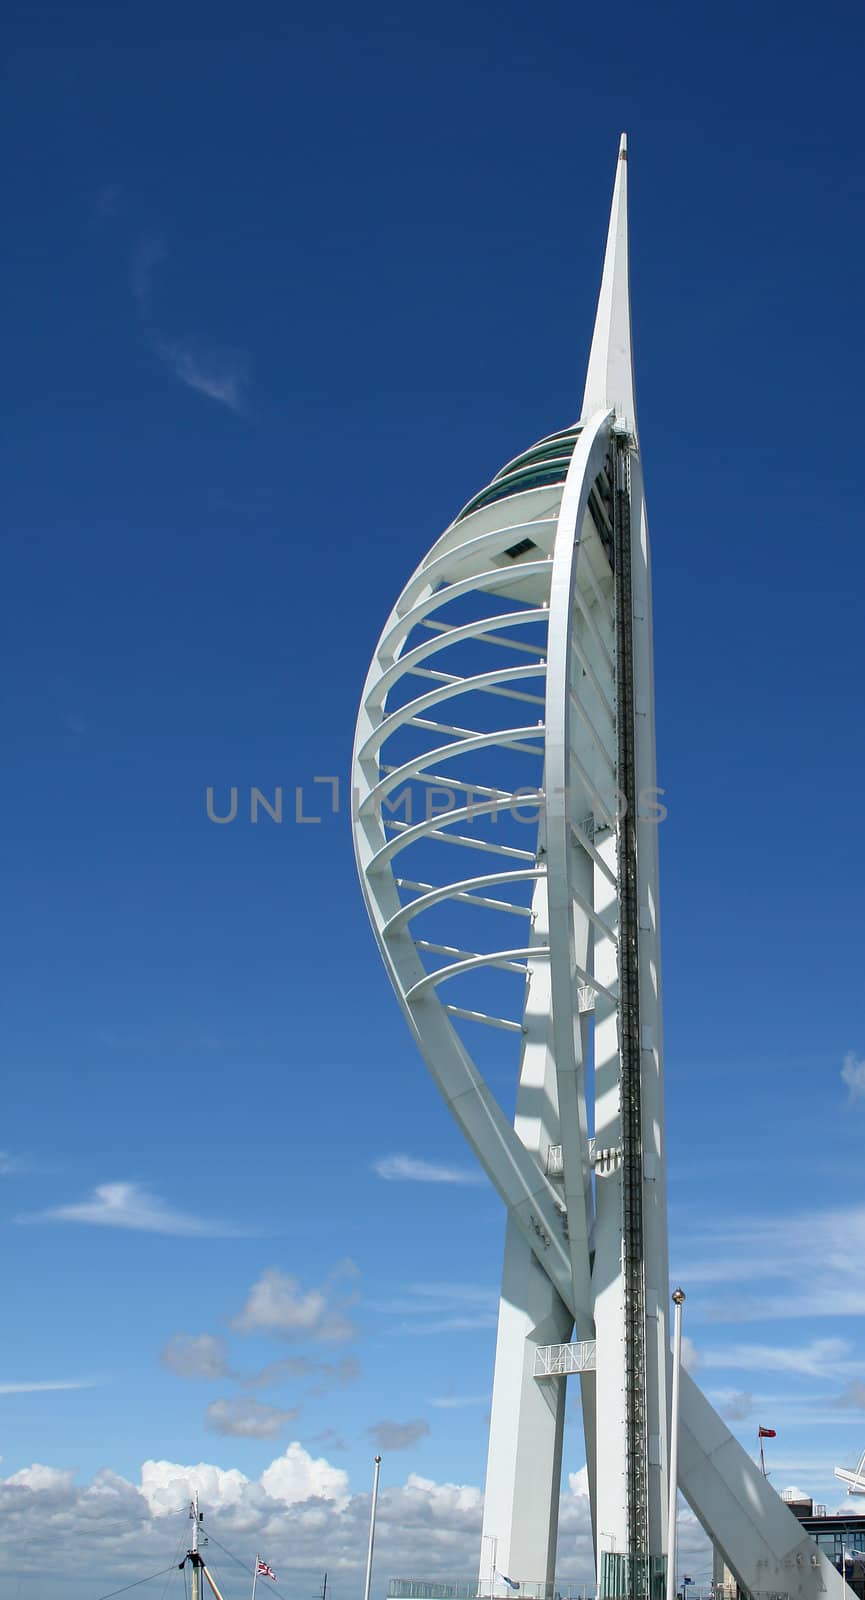 the spinnaker tower in portsmouth - england